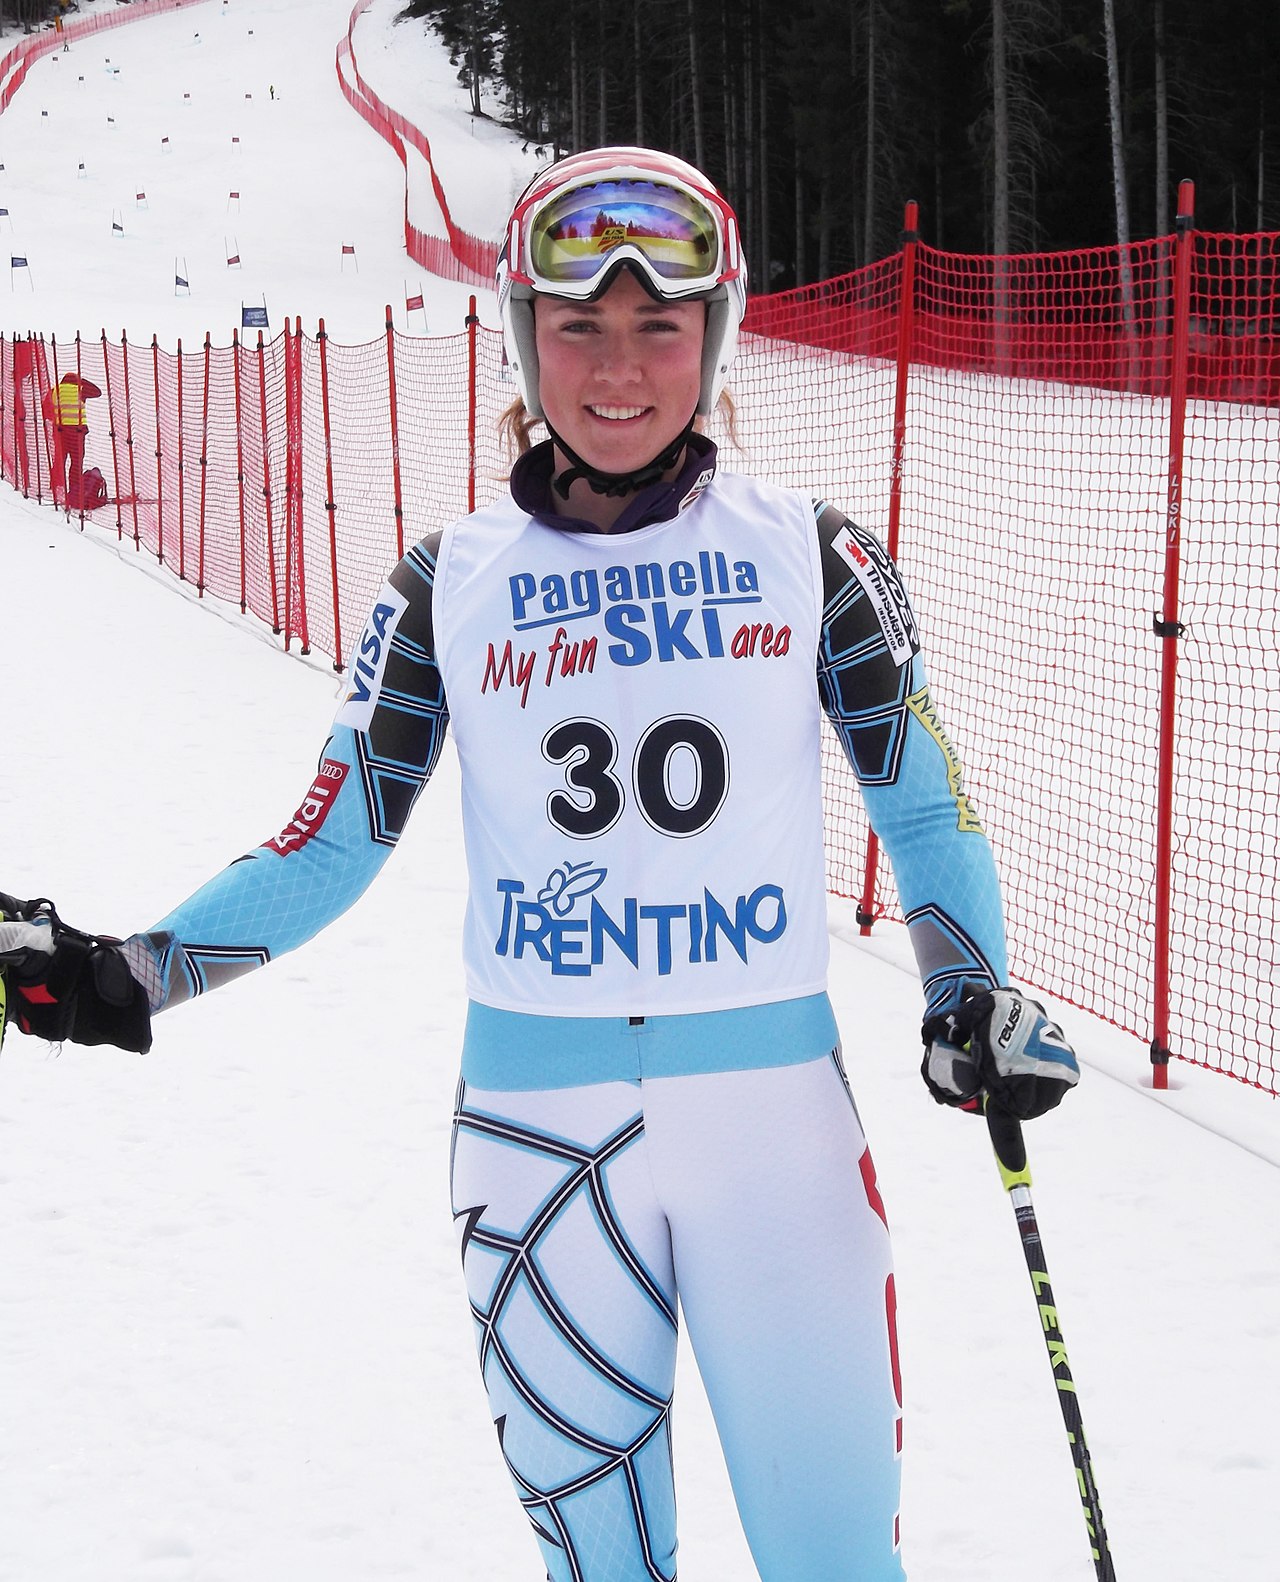 Mikaela Shiffrin with two Olympic gold medals, three World Championships, and 66 World Cup wins (and counting), Mikaela Shiffrin is one of the best Alpine skiers in history.